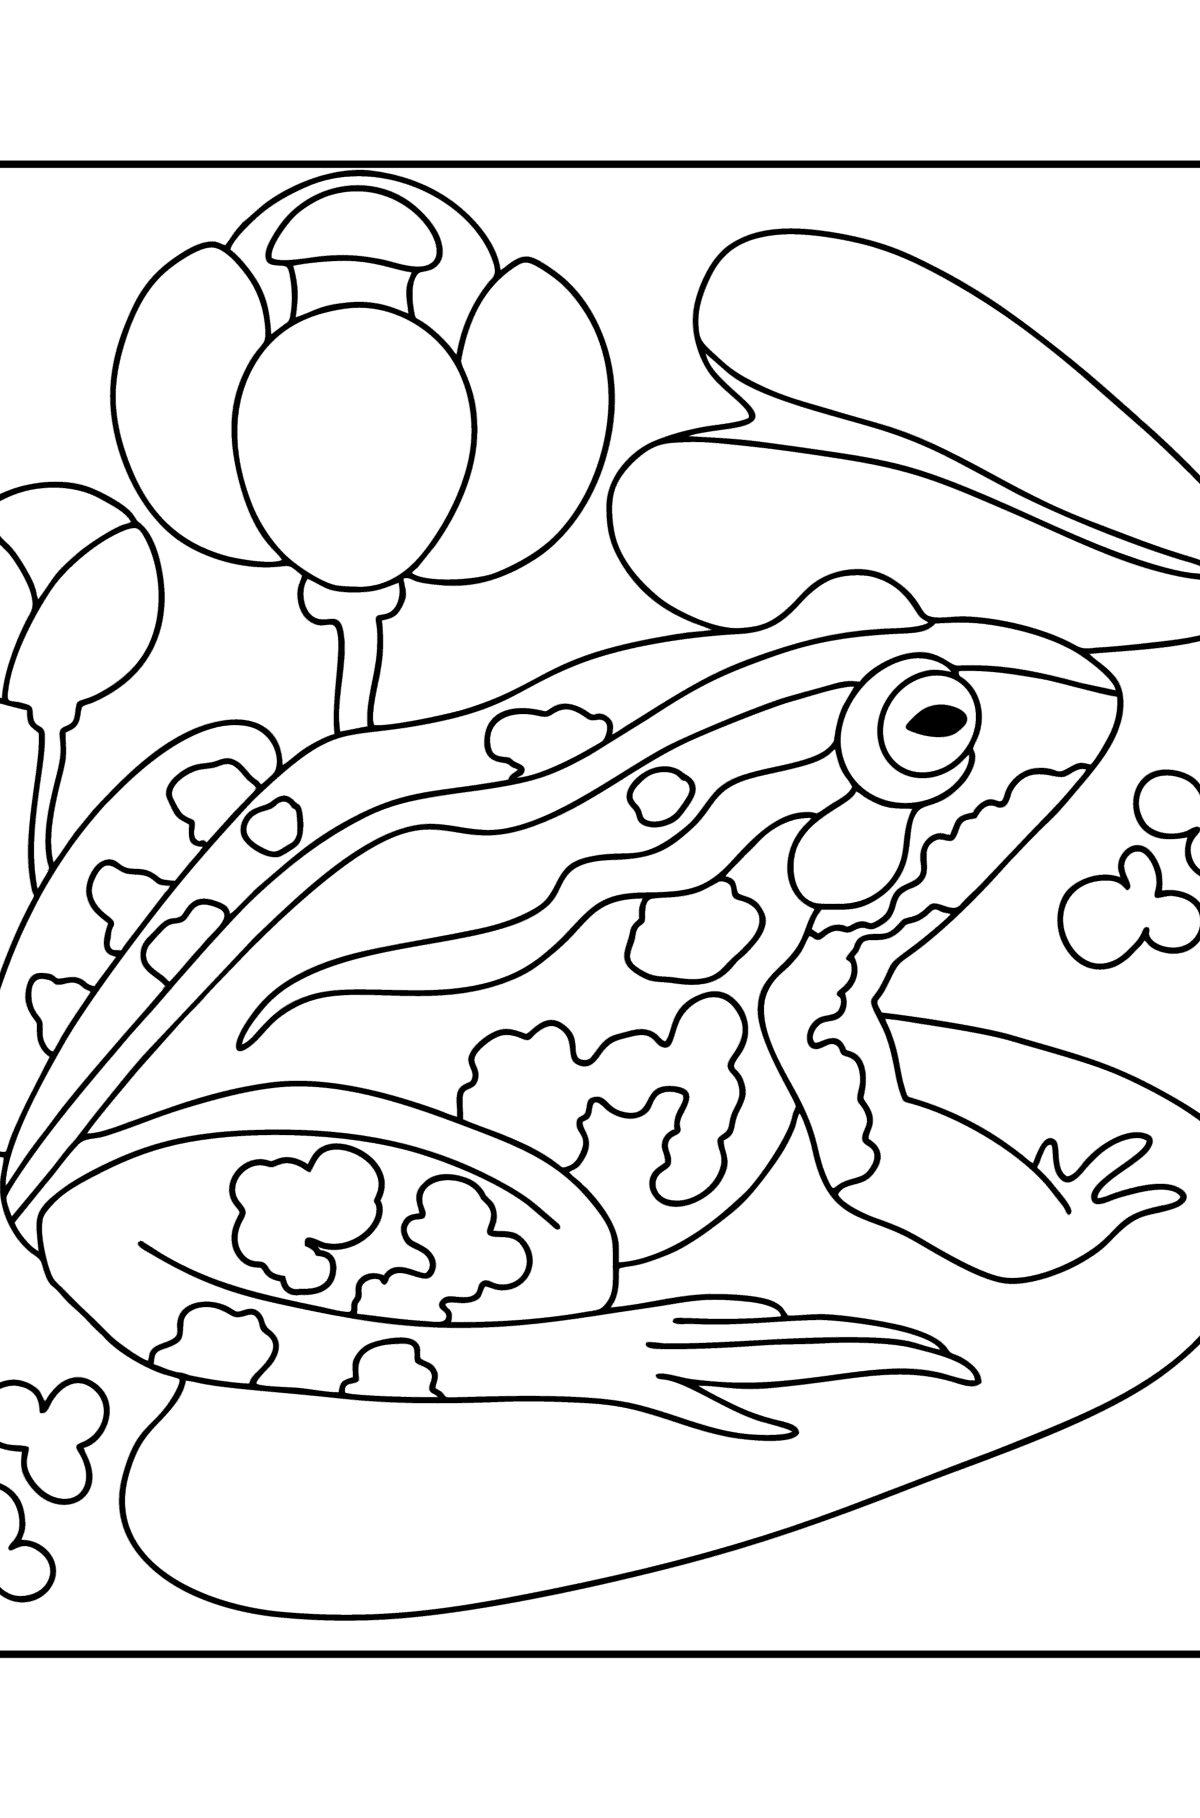 Frog on the lake сoloring page - Coloring Pages for Kids